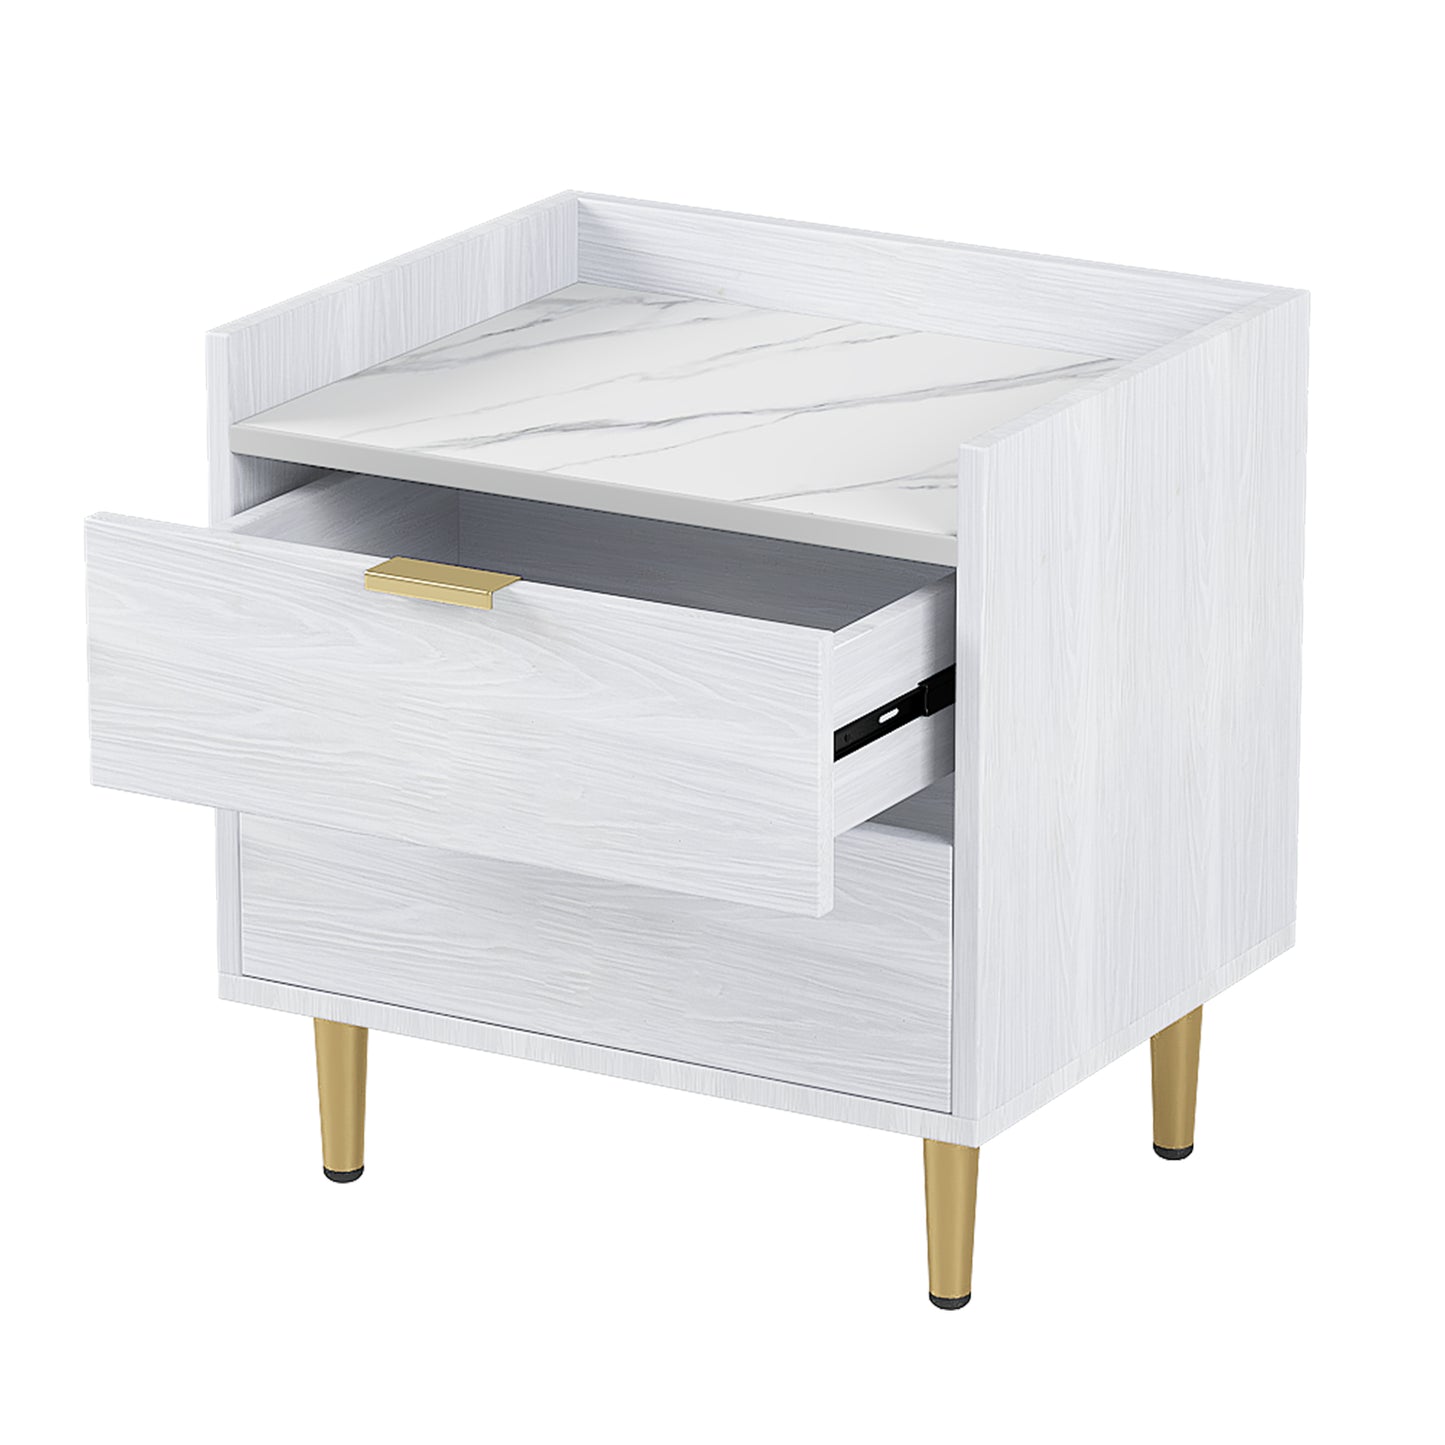 Mordern Wood Bedside Table with Metal Legs&Handles in White Finish